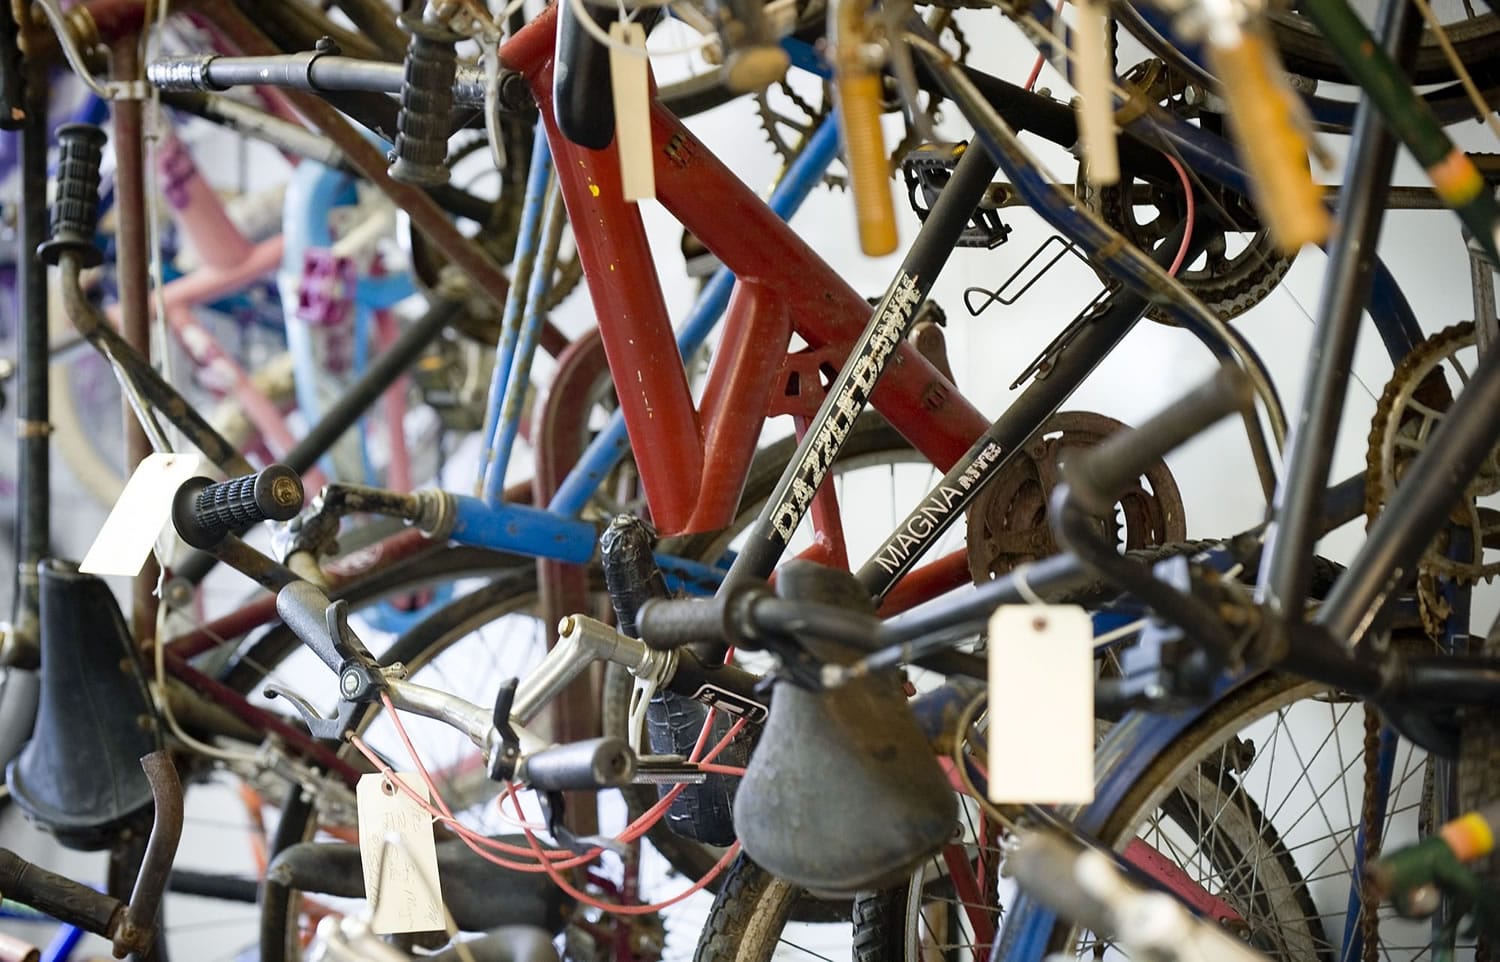 Used bikes await repair and cleanup Monday at Open House Ministries homeless shelter's new bike shop.